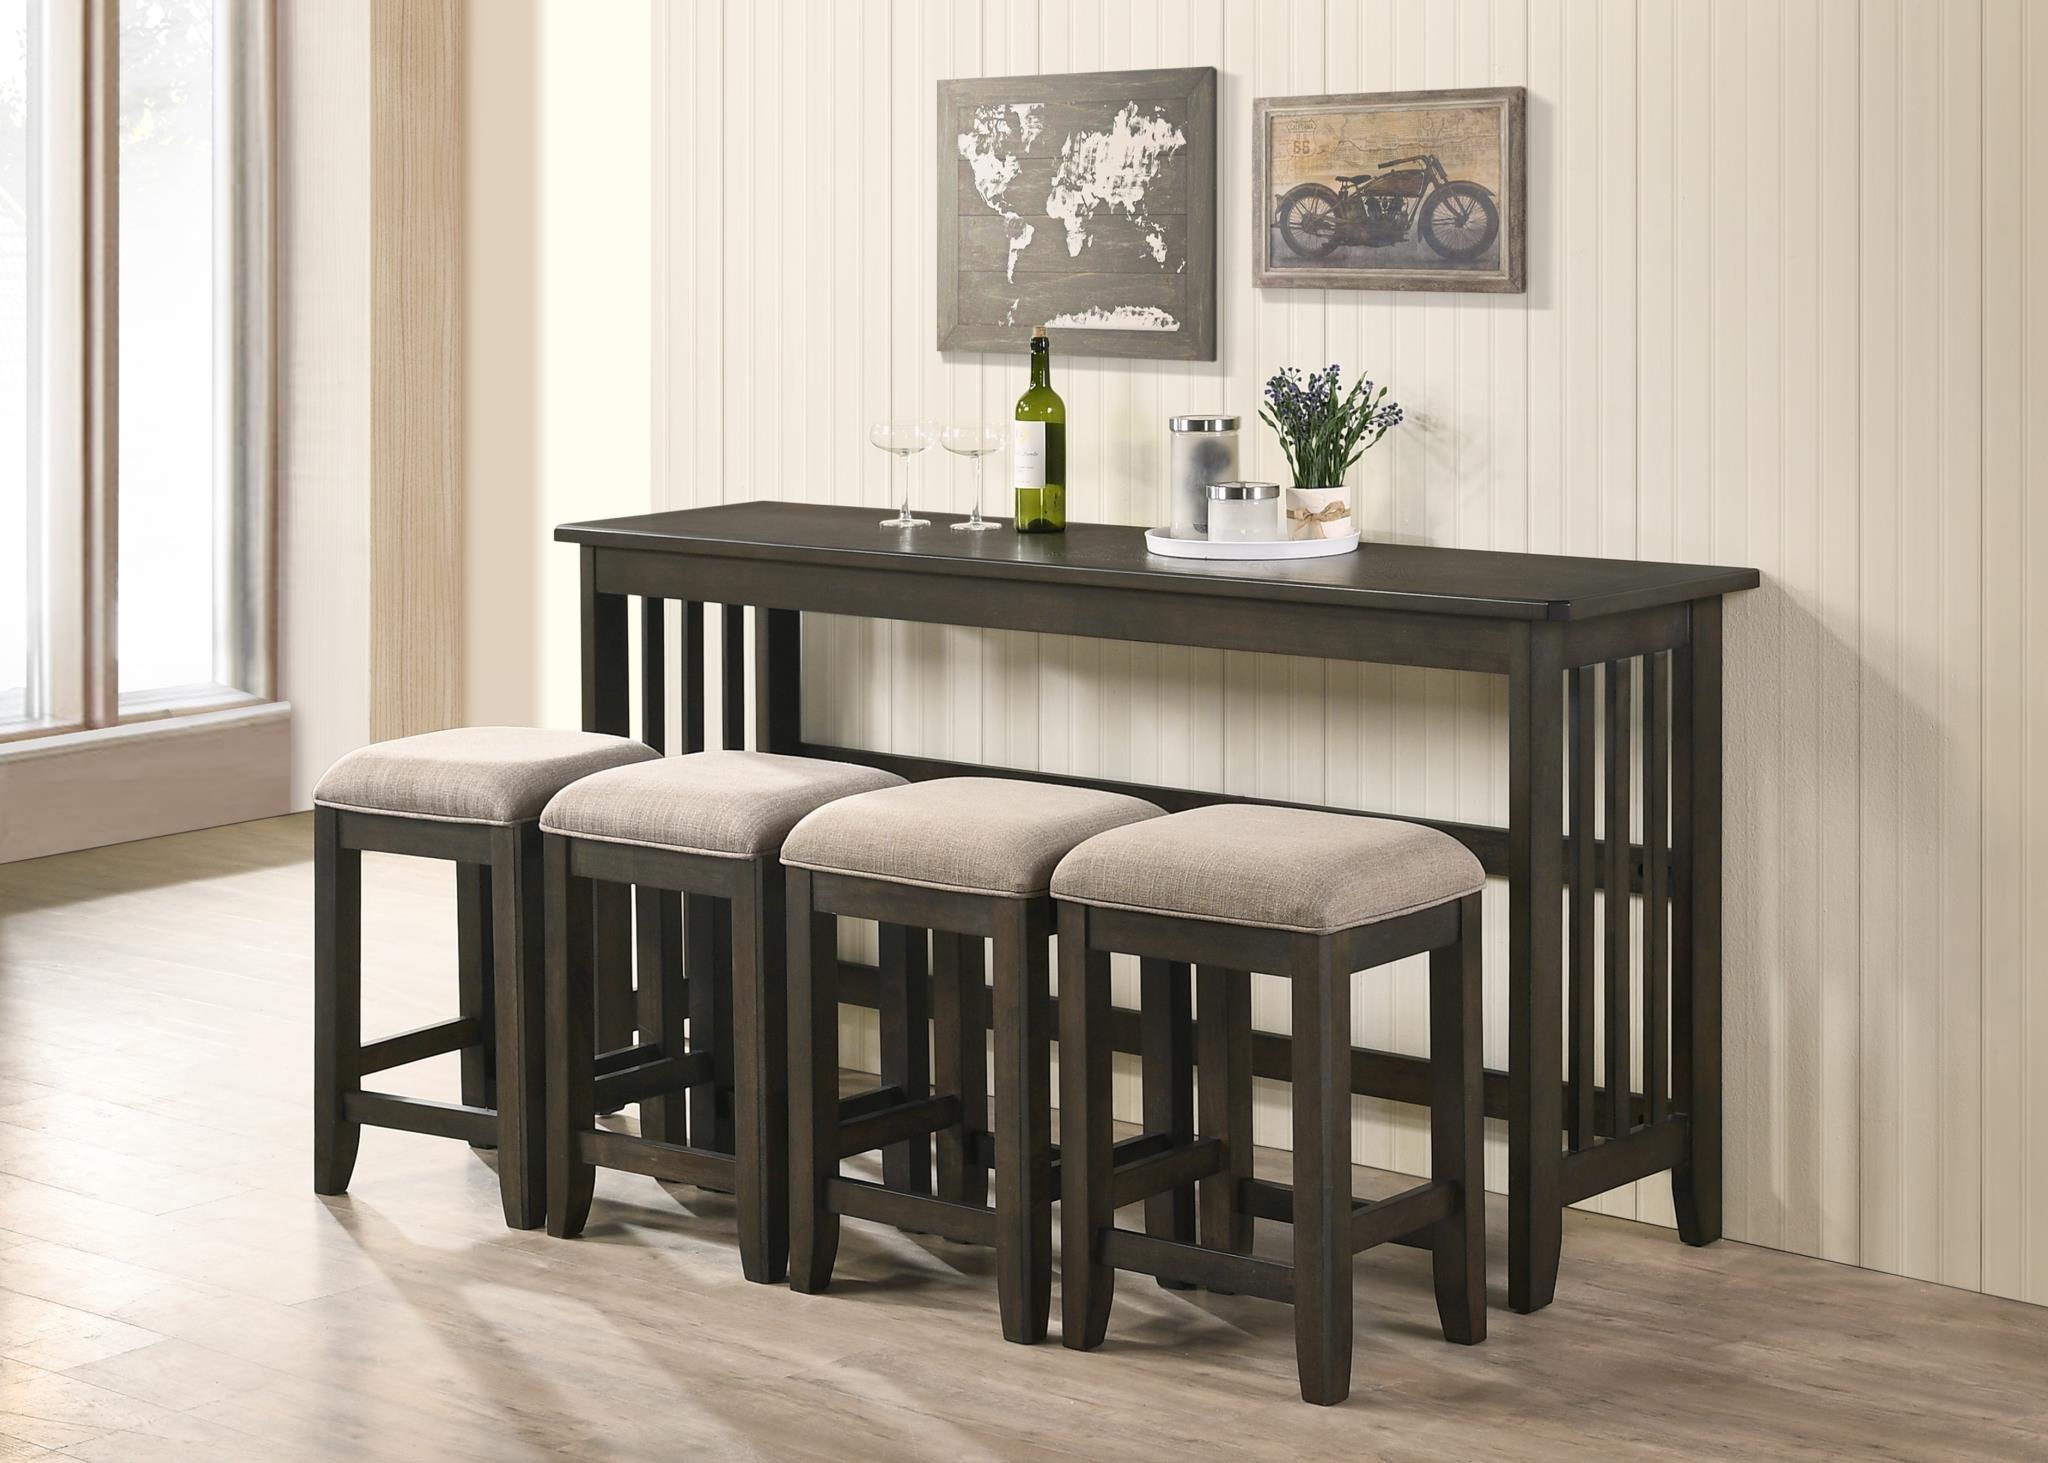 Transitional, Farmhouse Counter Table Set Carmina 5944DS-533 in Brown, Beige 